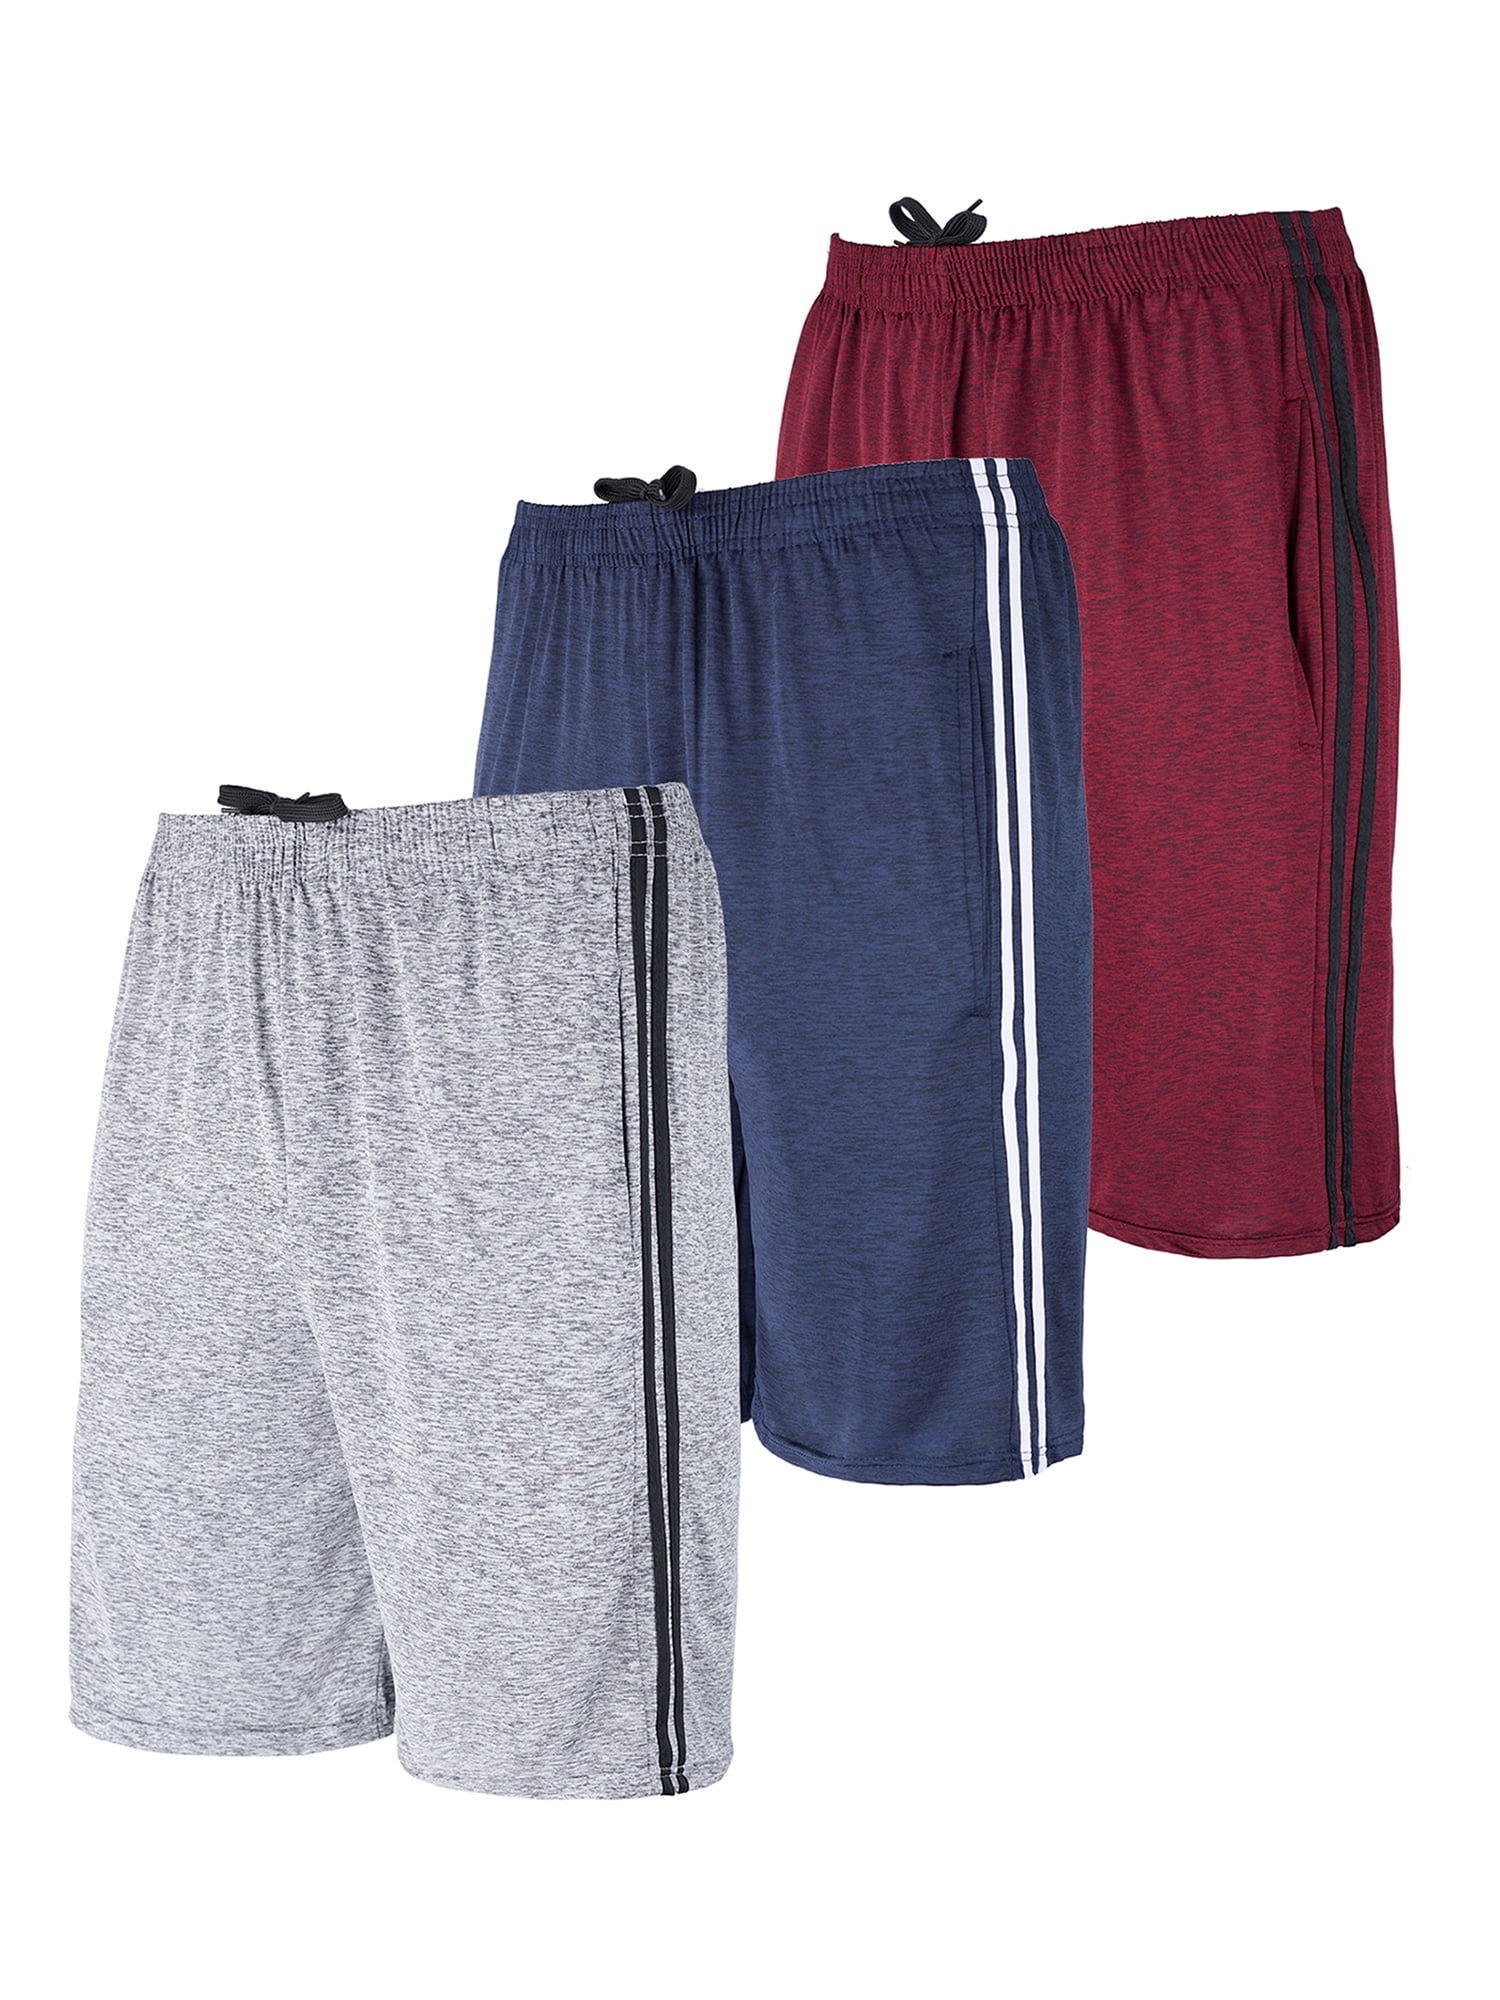 Real Essentials Men's Big & Tall 3-Pack Dry Fit & Mesh Active Athletic Perfomance Shorts 3X-5X 